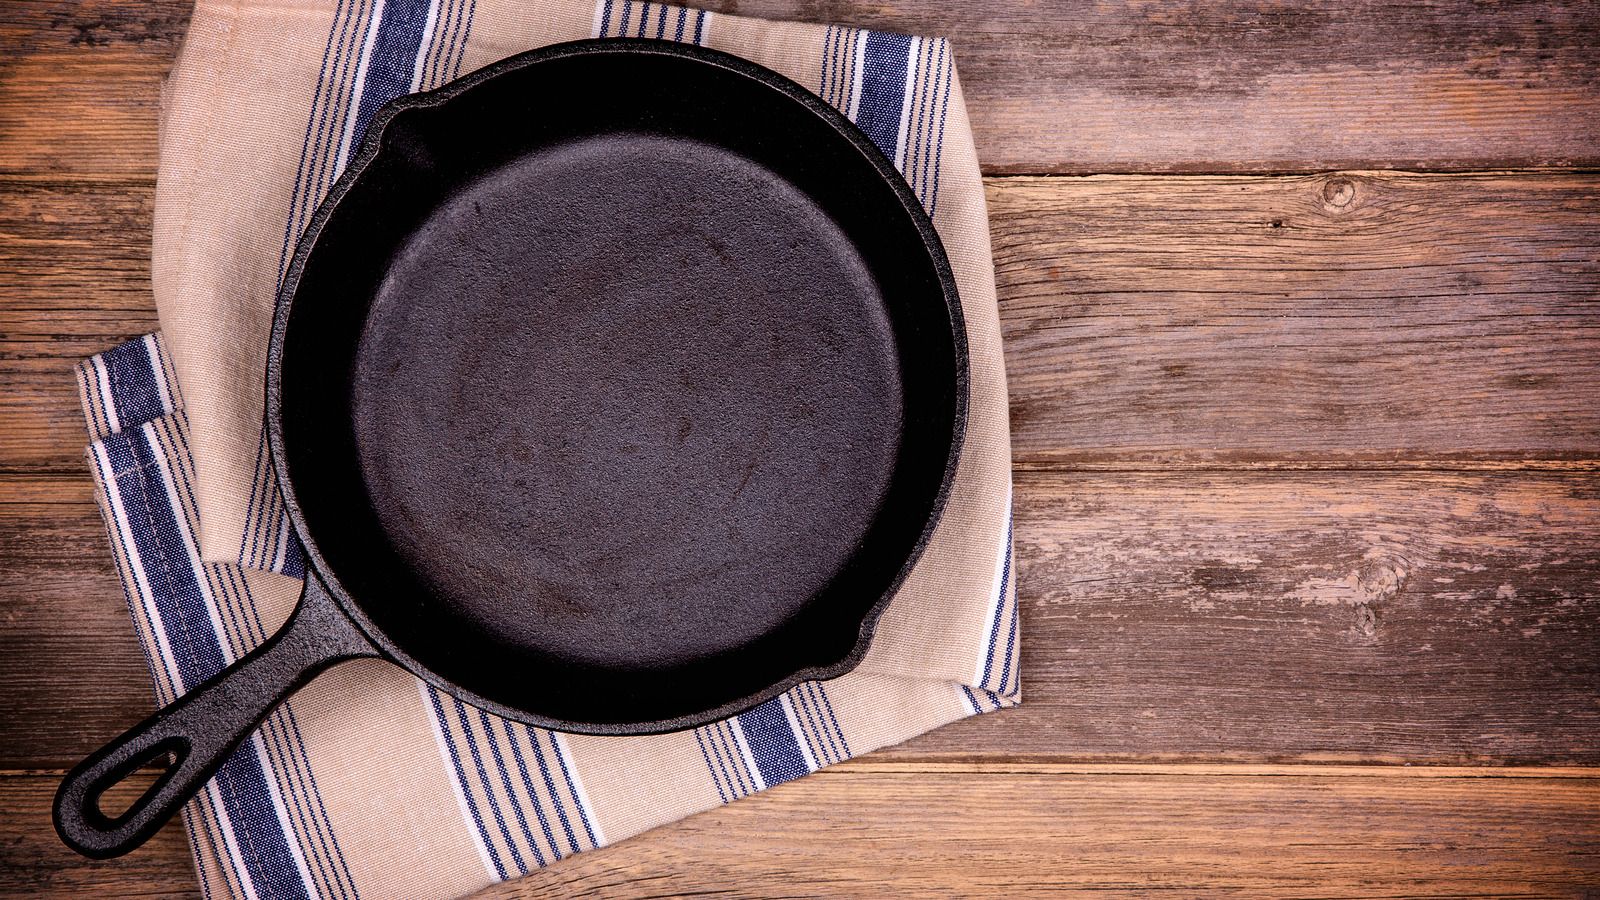 https://www.thedailymeal.com/img/gallery/cast-iron-brands-to-buy-and-to-avoid/l-intro-1675806822.jpg